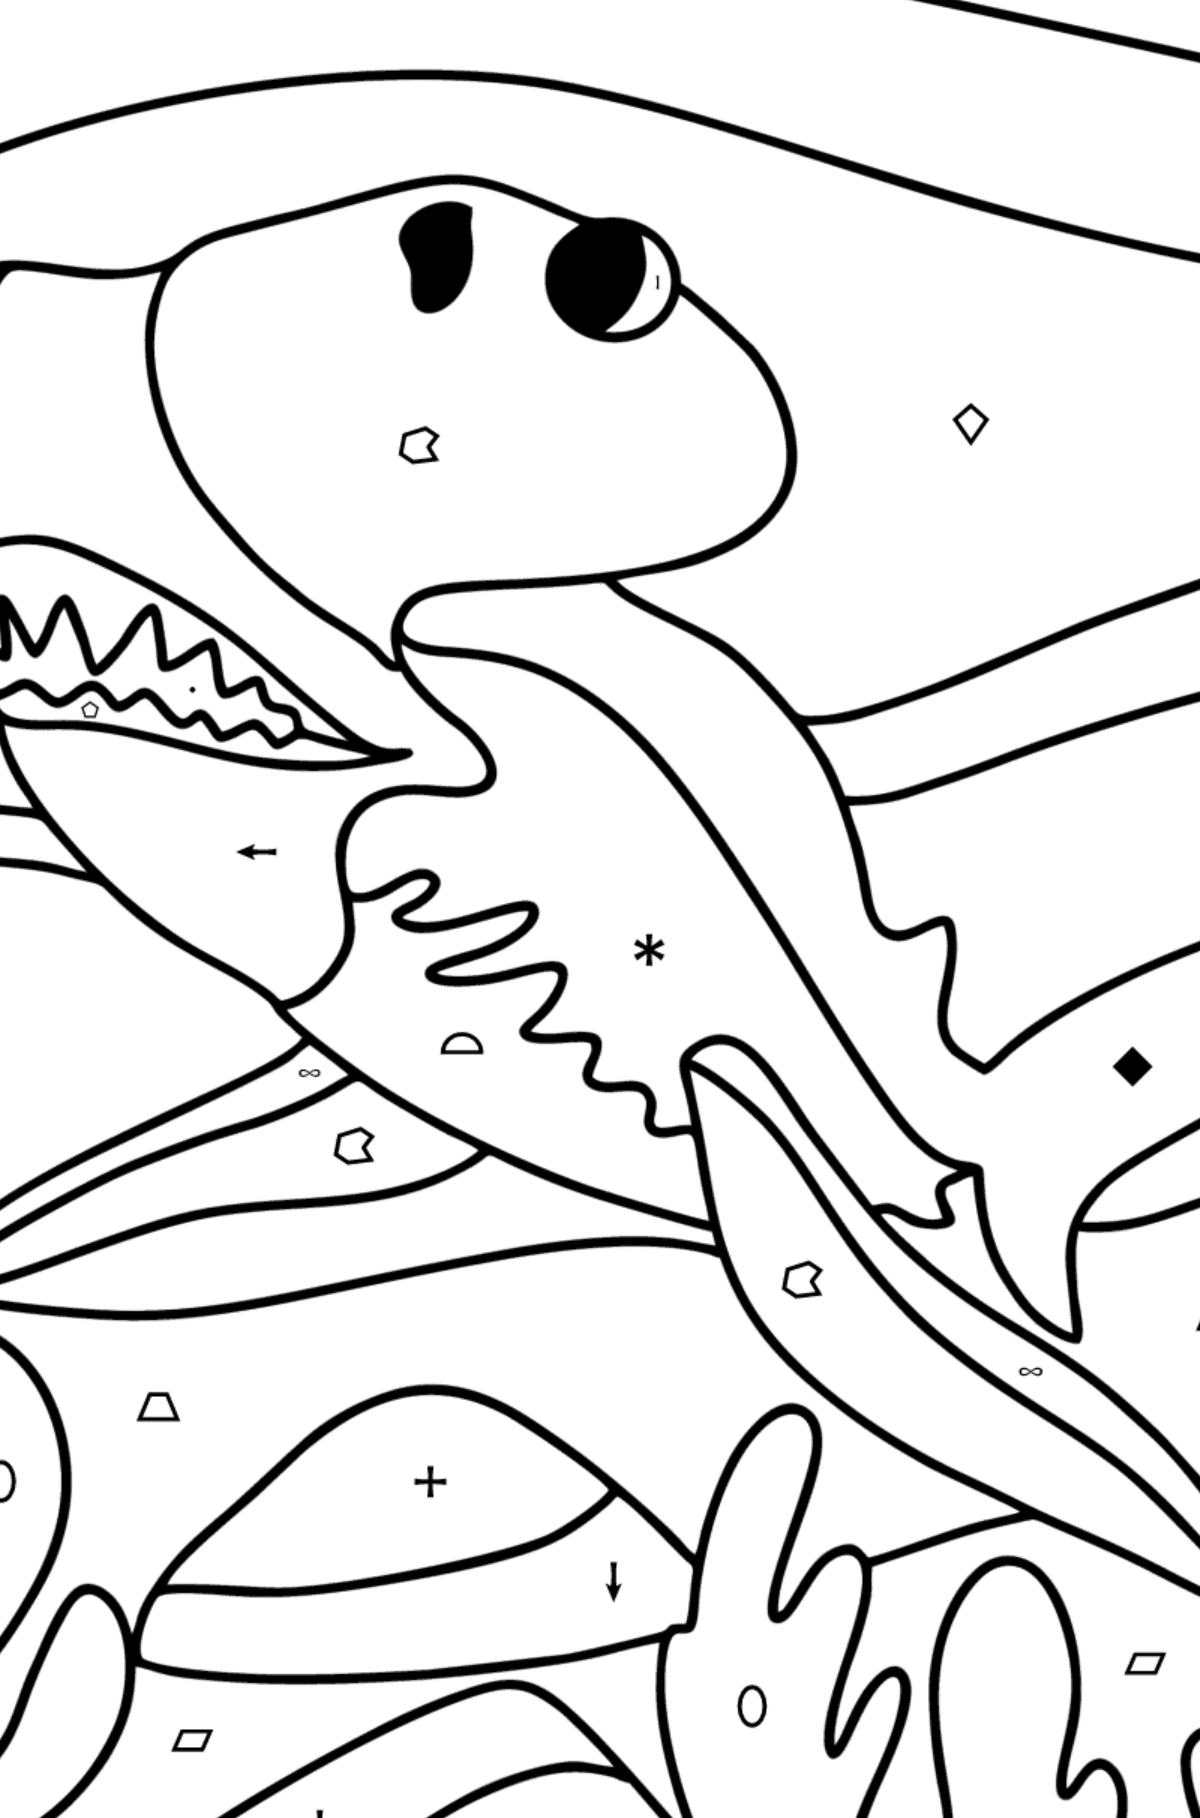 Hammerhead shark coloring page - Coloring by Symbols and Geometric Shapes for Kids